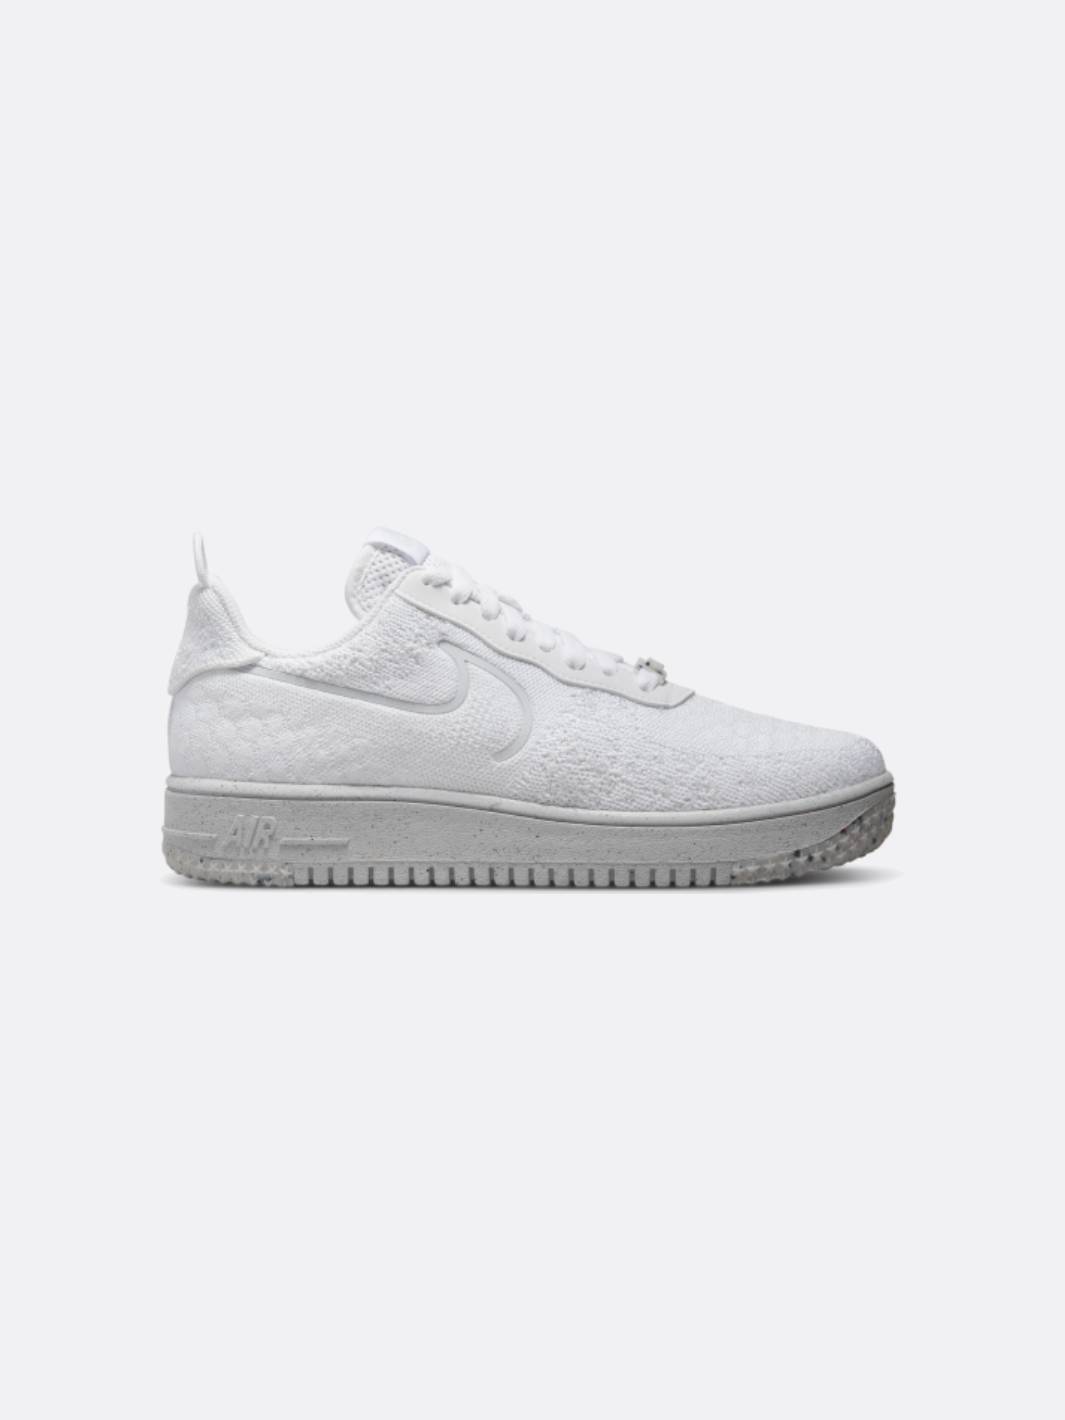 Nike Air Force 1 Low Crater Flyknit White Platinum Tint Men's - DM0590-100  - US